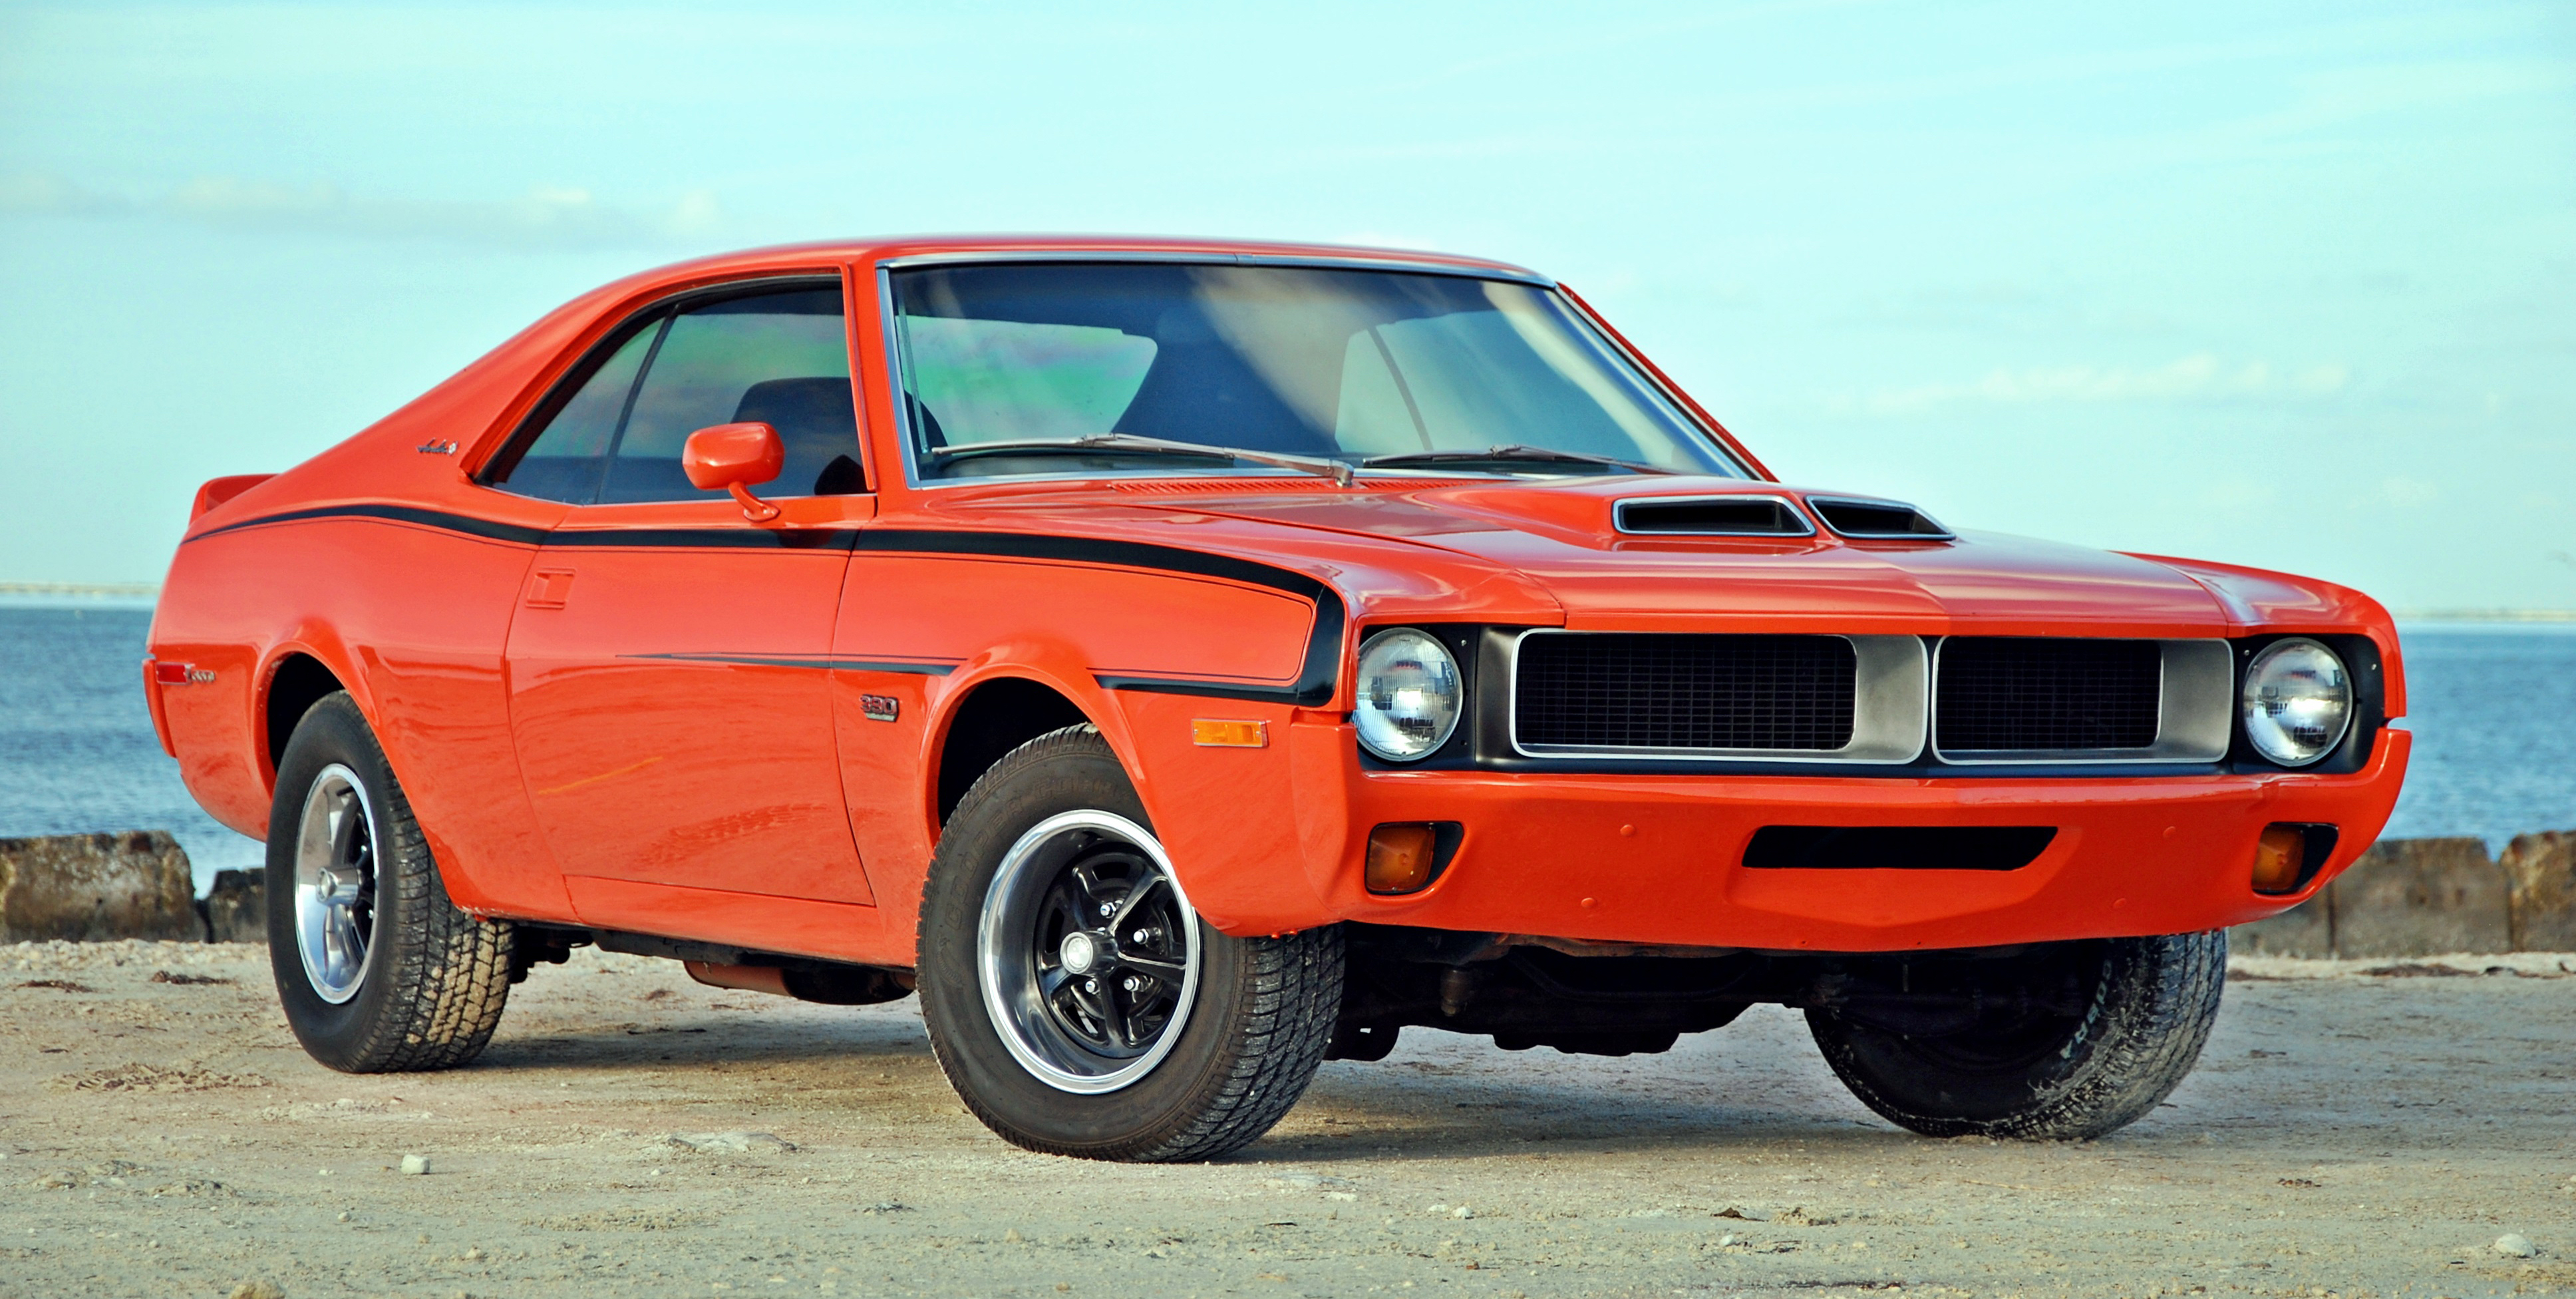 70s muscle cars